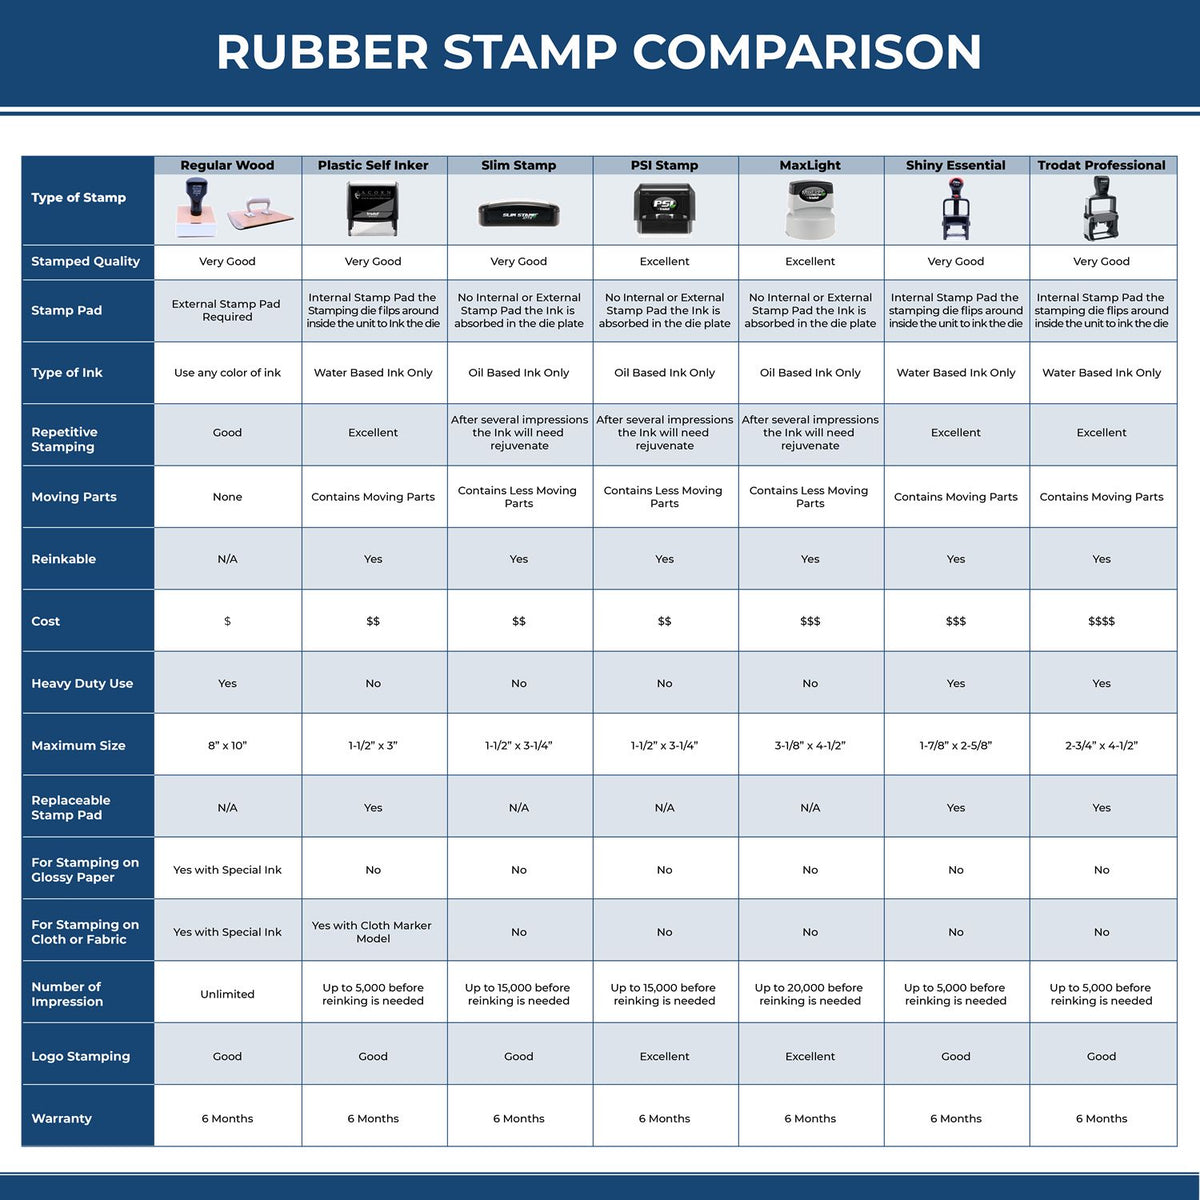 A comparison chart for the different types of mount models available for the MaxLight Premium Pre-Inked Minnesota State Seal Notarial Stamp.